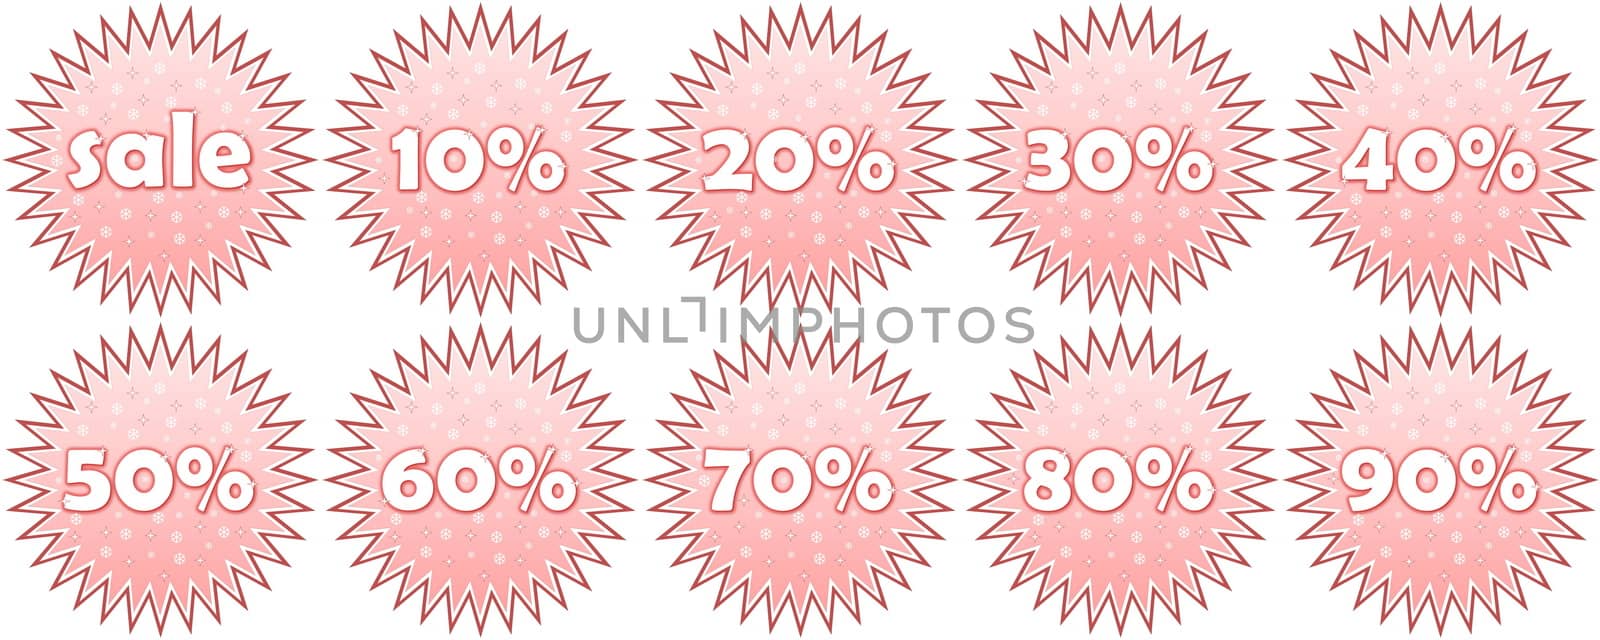 Set of winter sale icons by Elenaphotos21